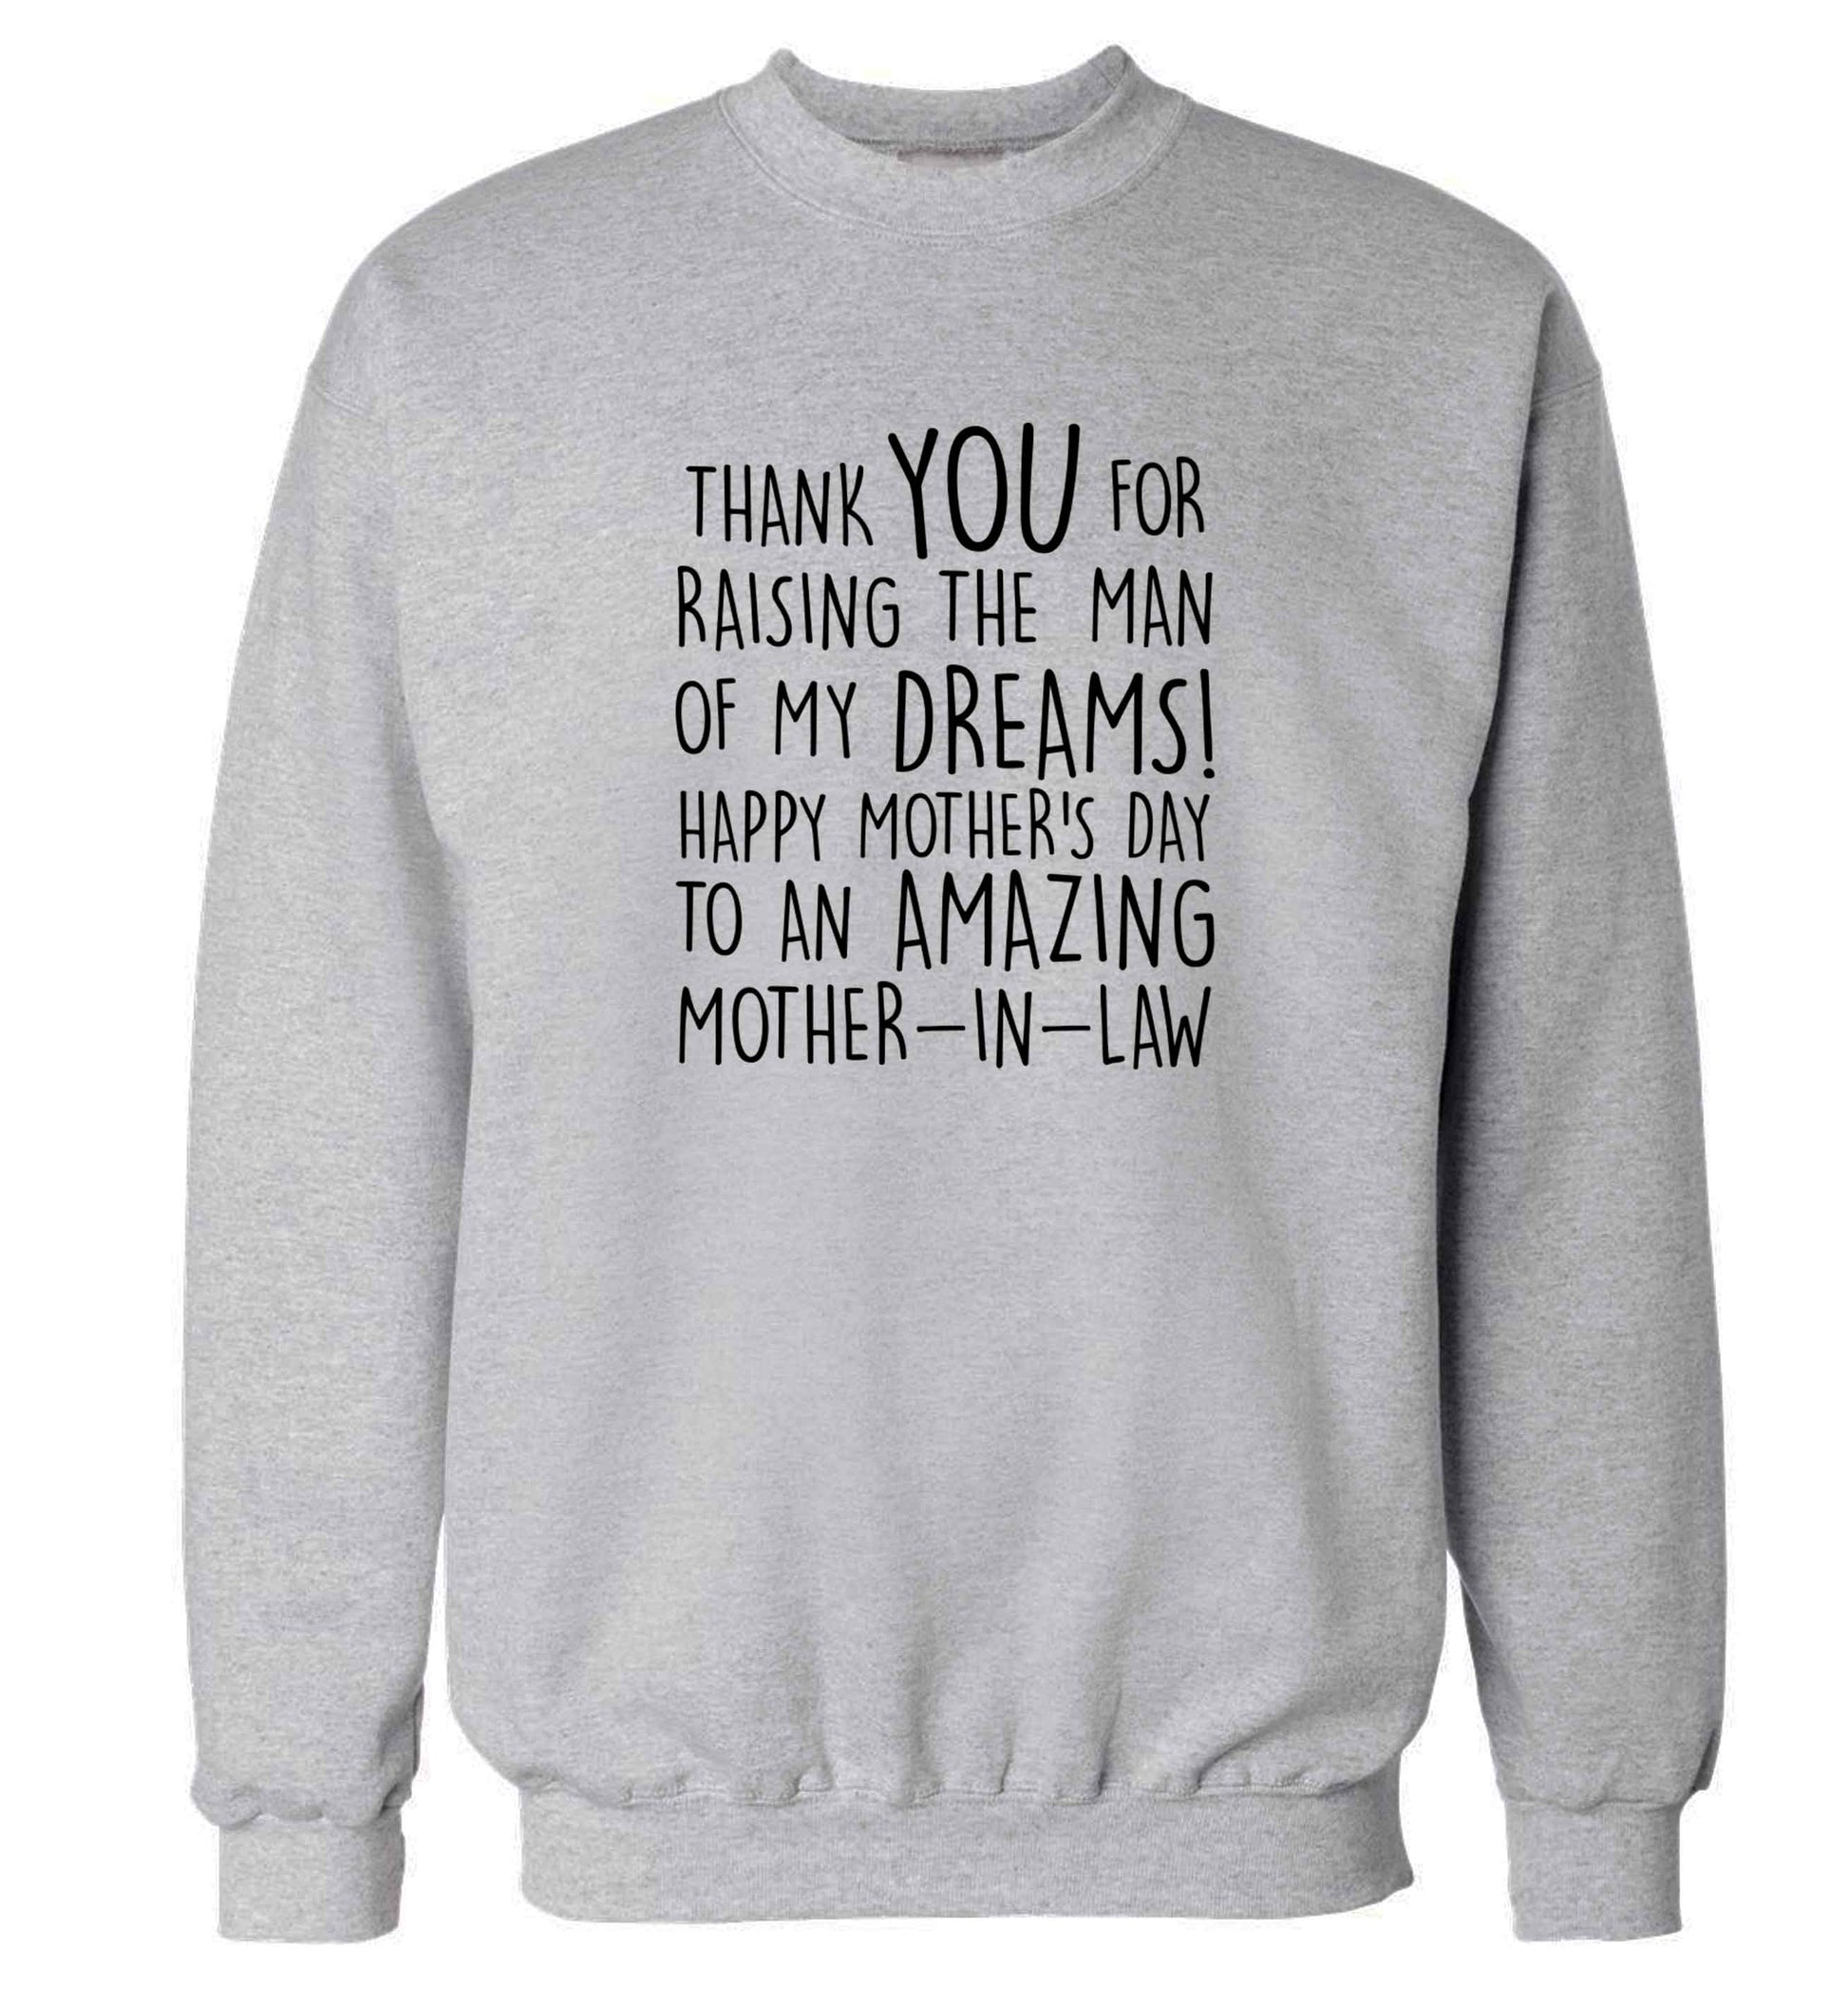 Raising the man of my dreams mother's day mother-in-law adult's unisex grey sweater 2XL